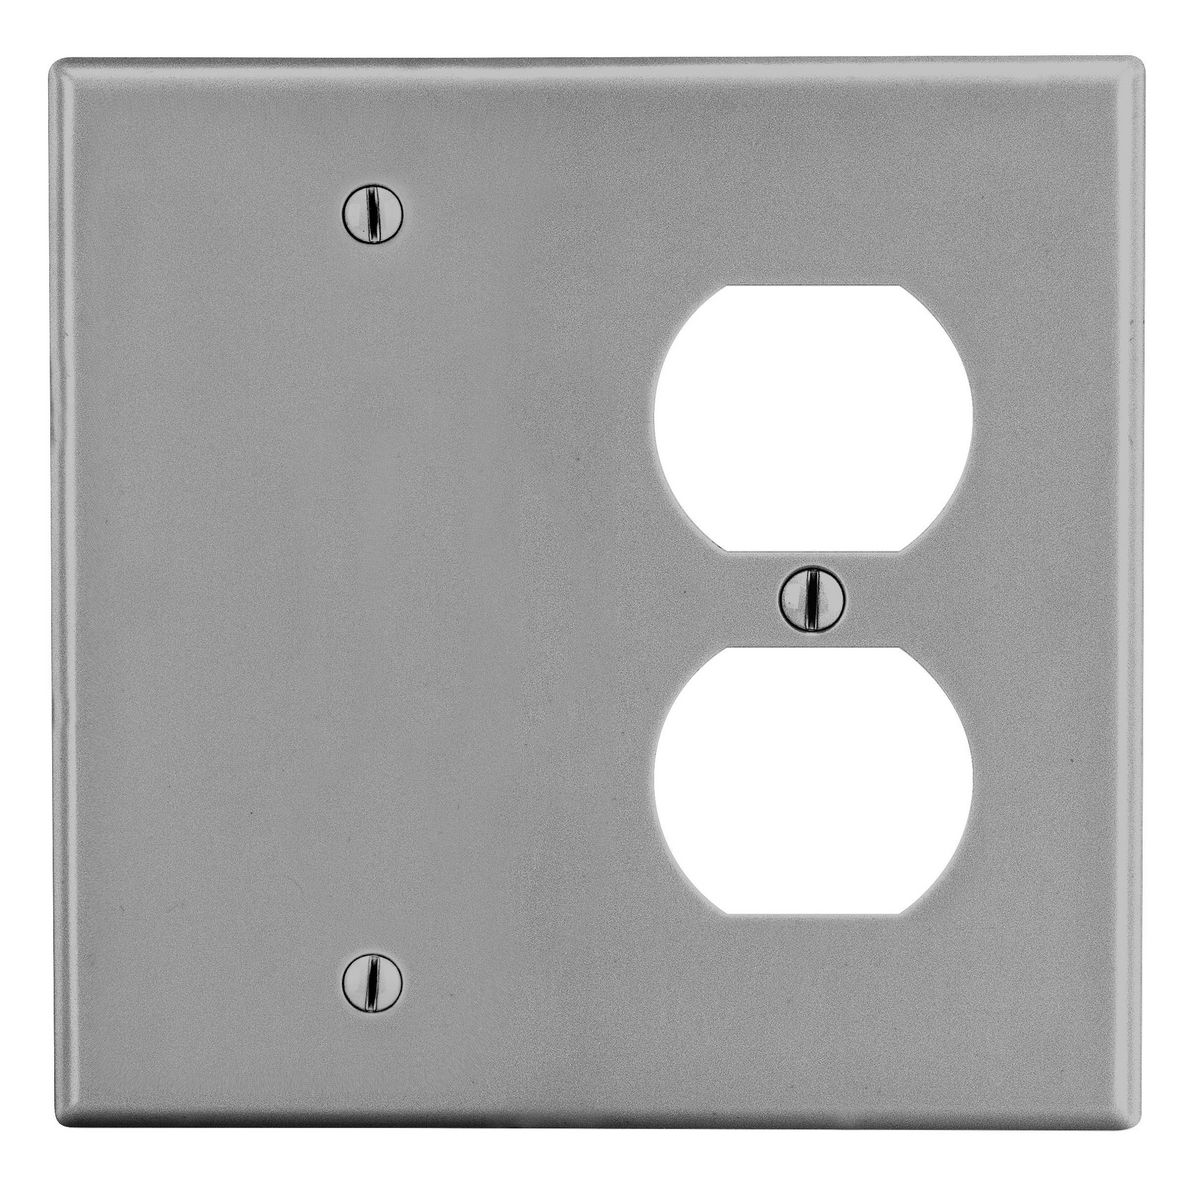 WALLPLATE, 2-G, 1) DUP 1) BLANK, GY